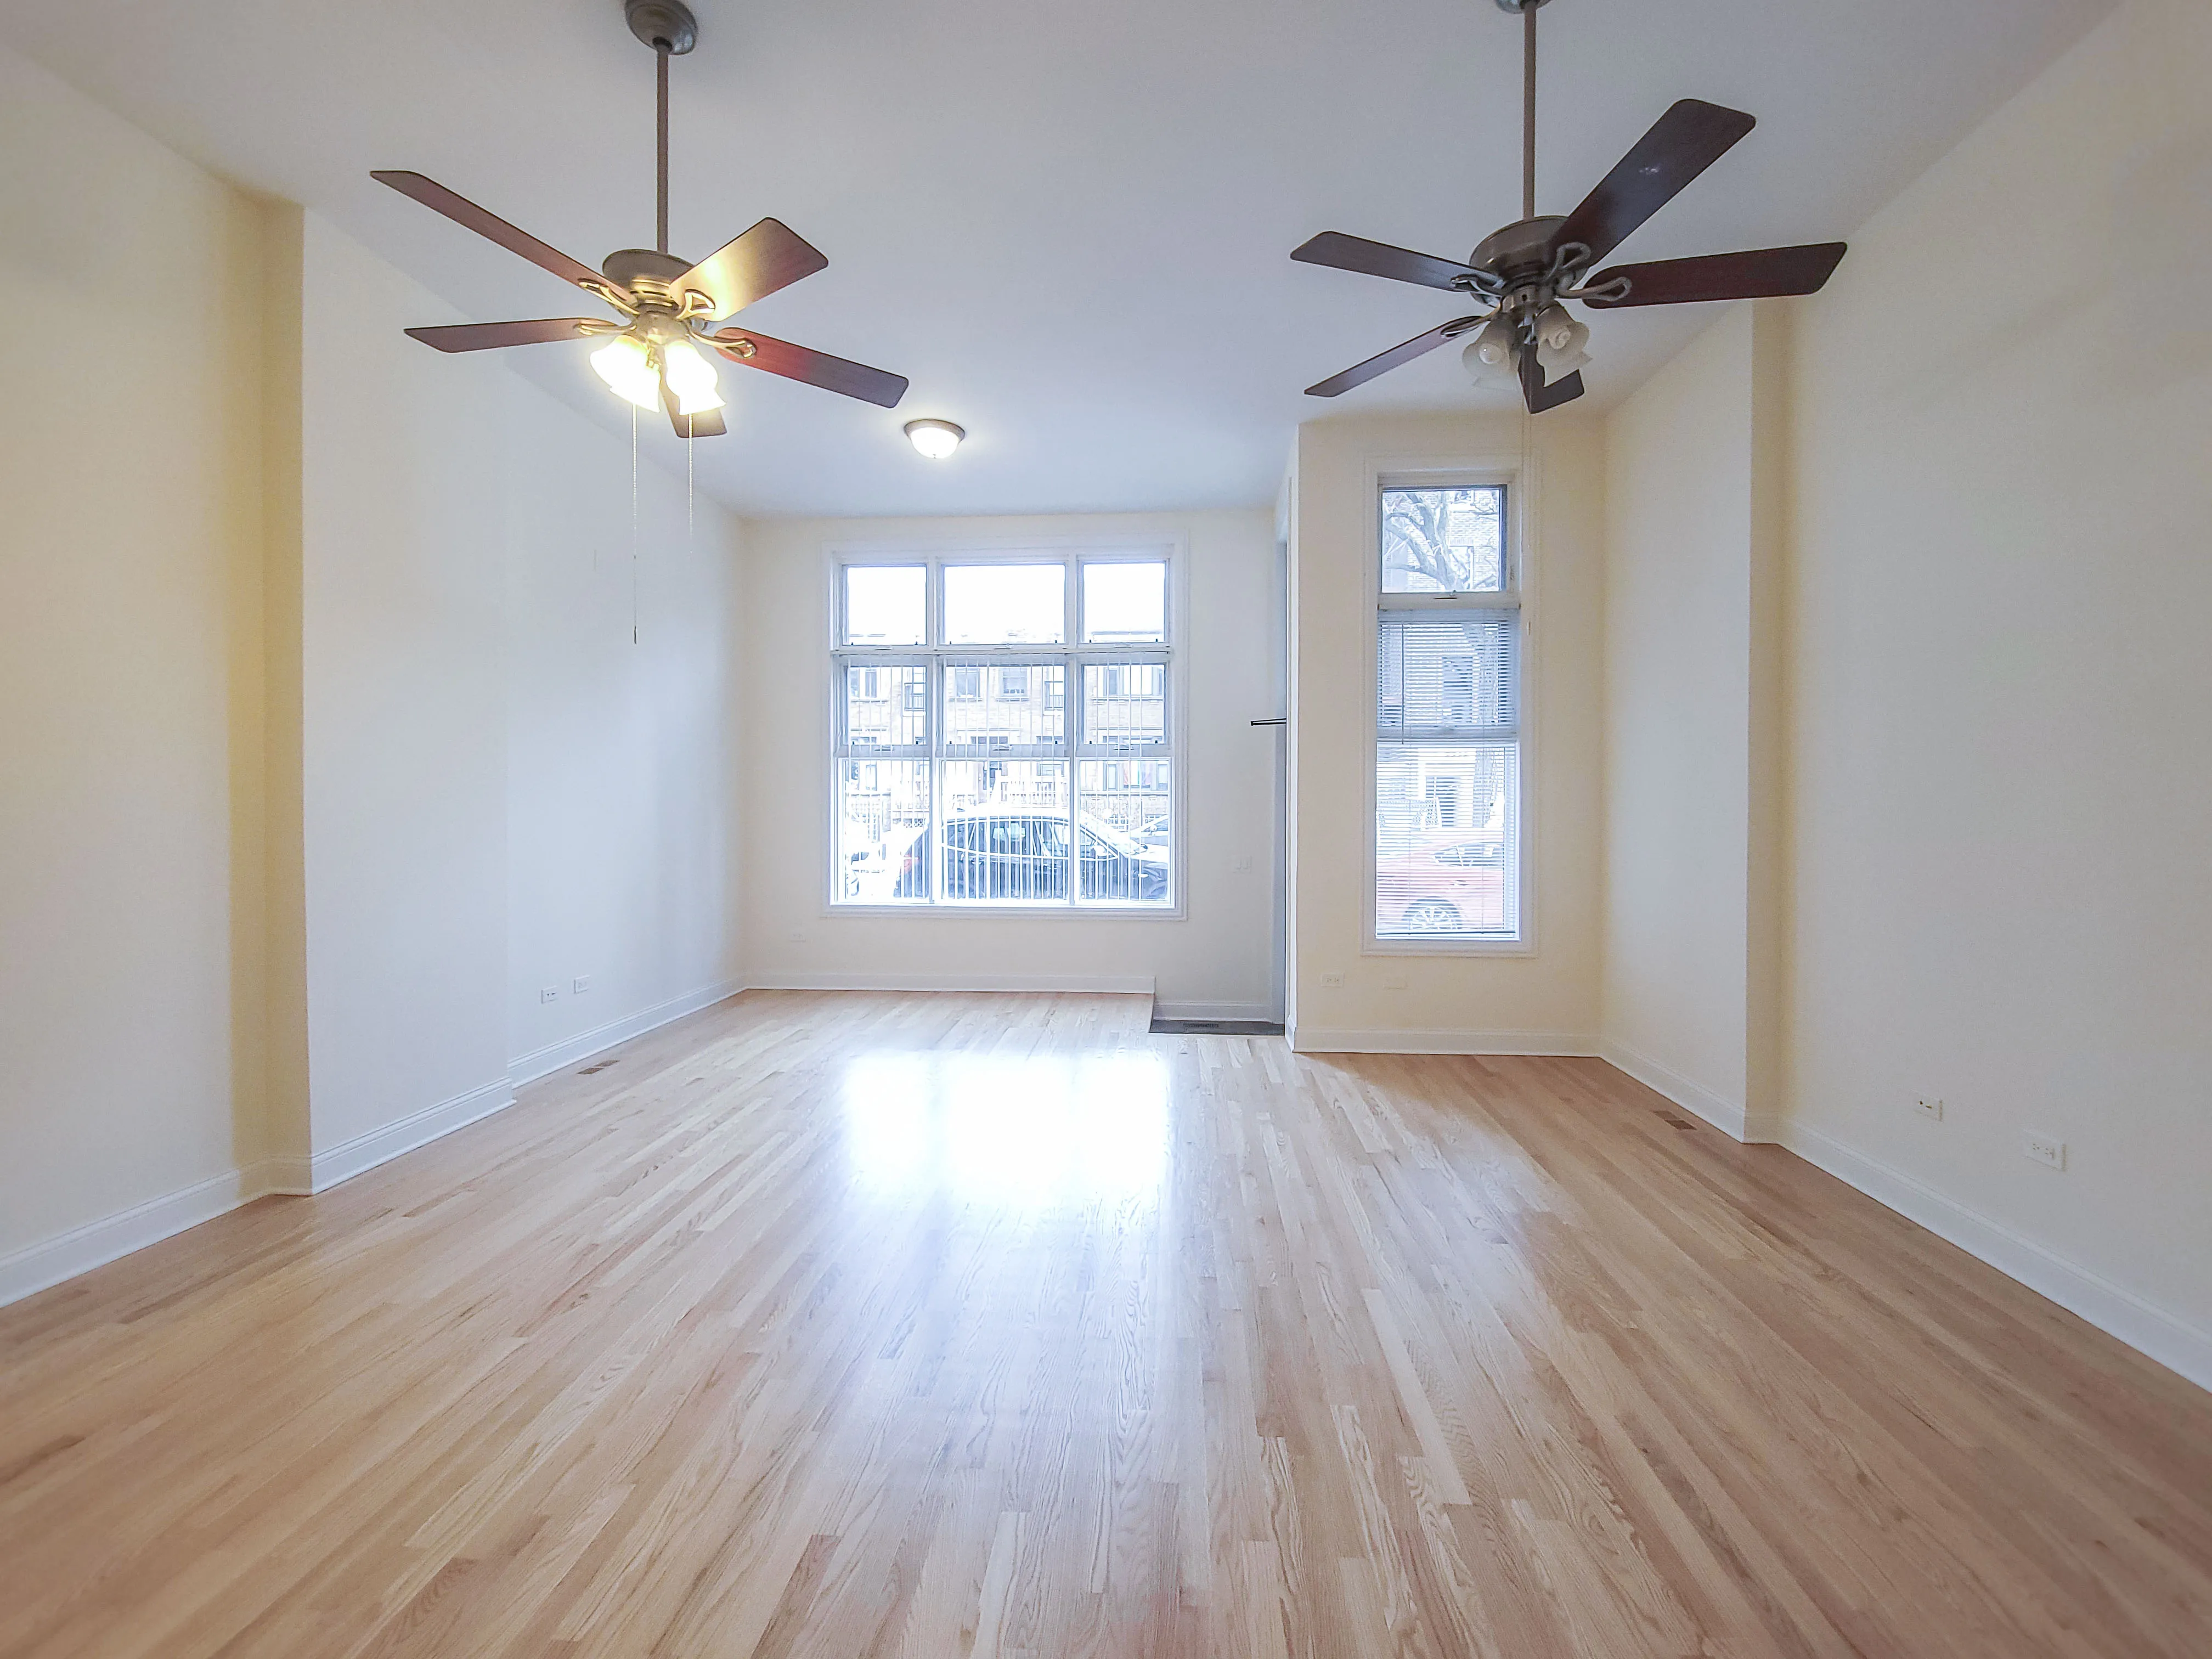 3338 N SHEFFIELD AVE 60657-Sheffield Apartments-unit#1-Chicago-IL